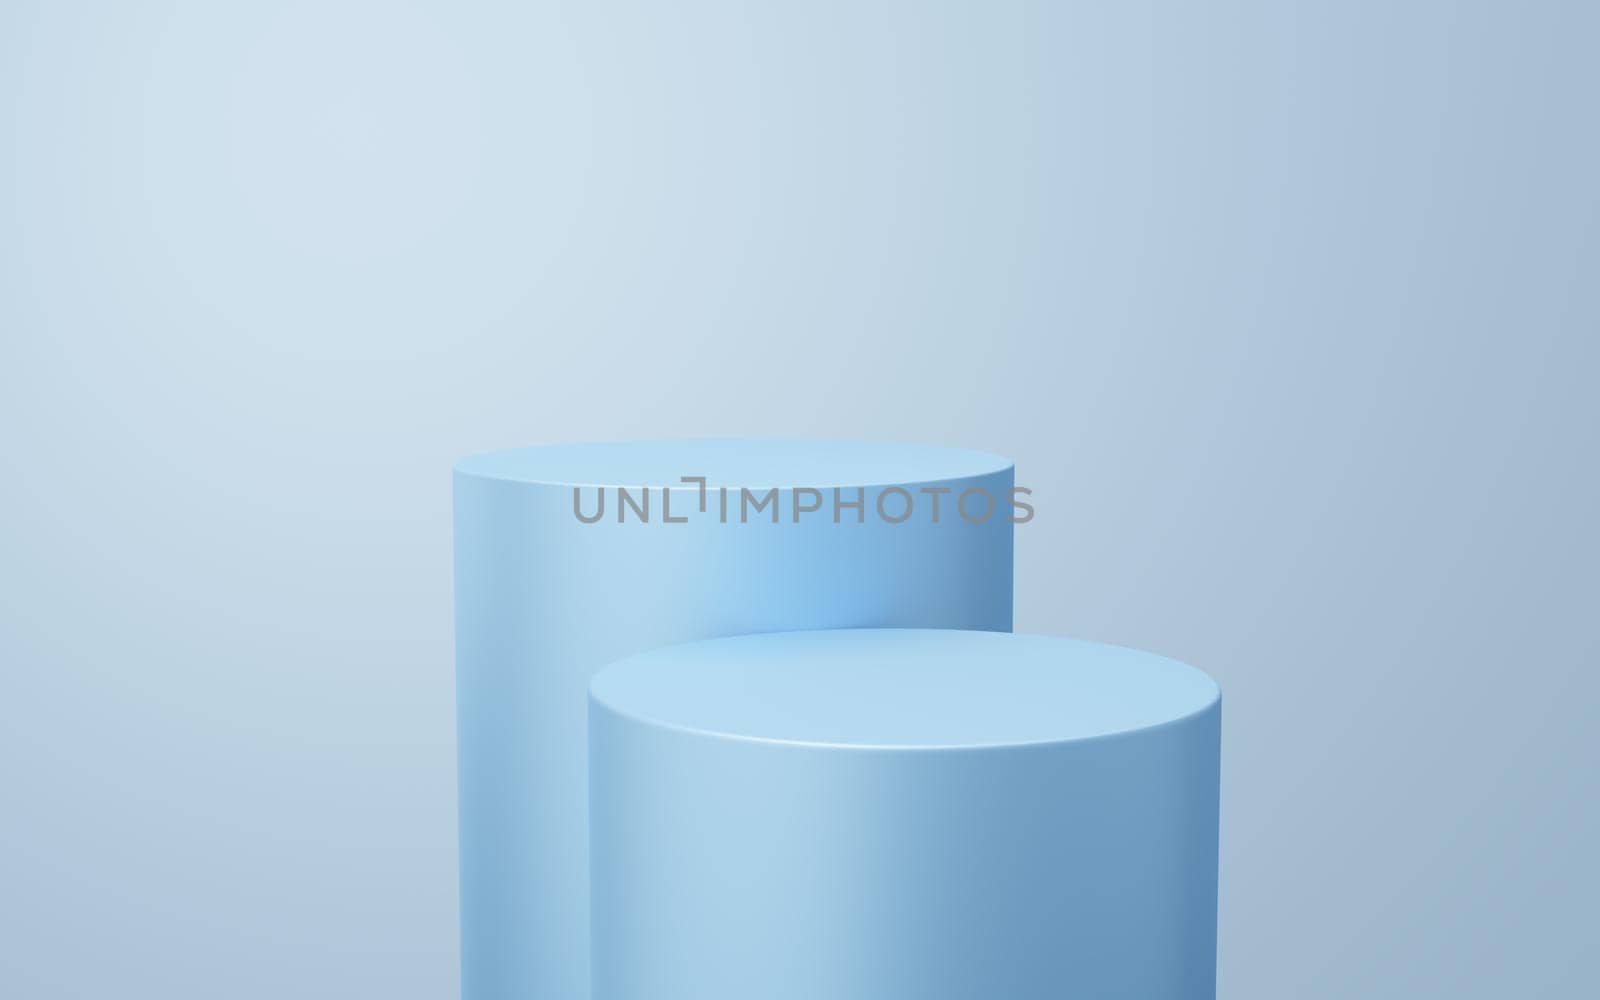 2 Empty blue cylinder podium floating on white copy space background. Abstract minimal studio 3d geometric shape object. Monotone pedestal mockup space for display of product design. 3d rendering.